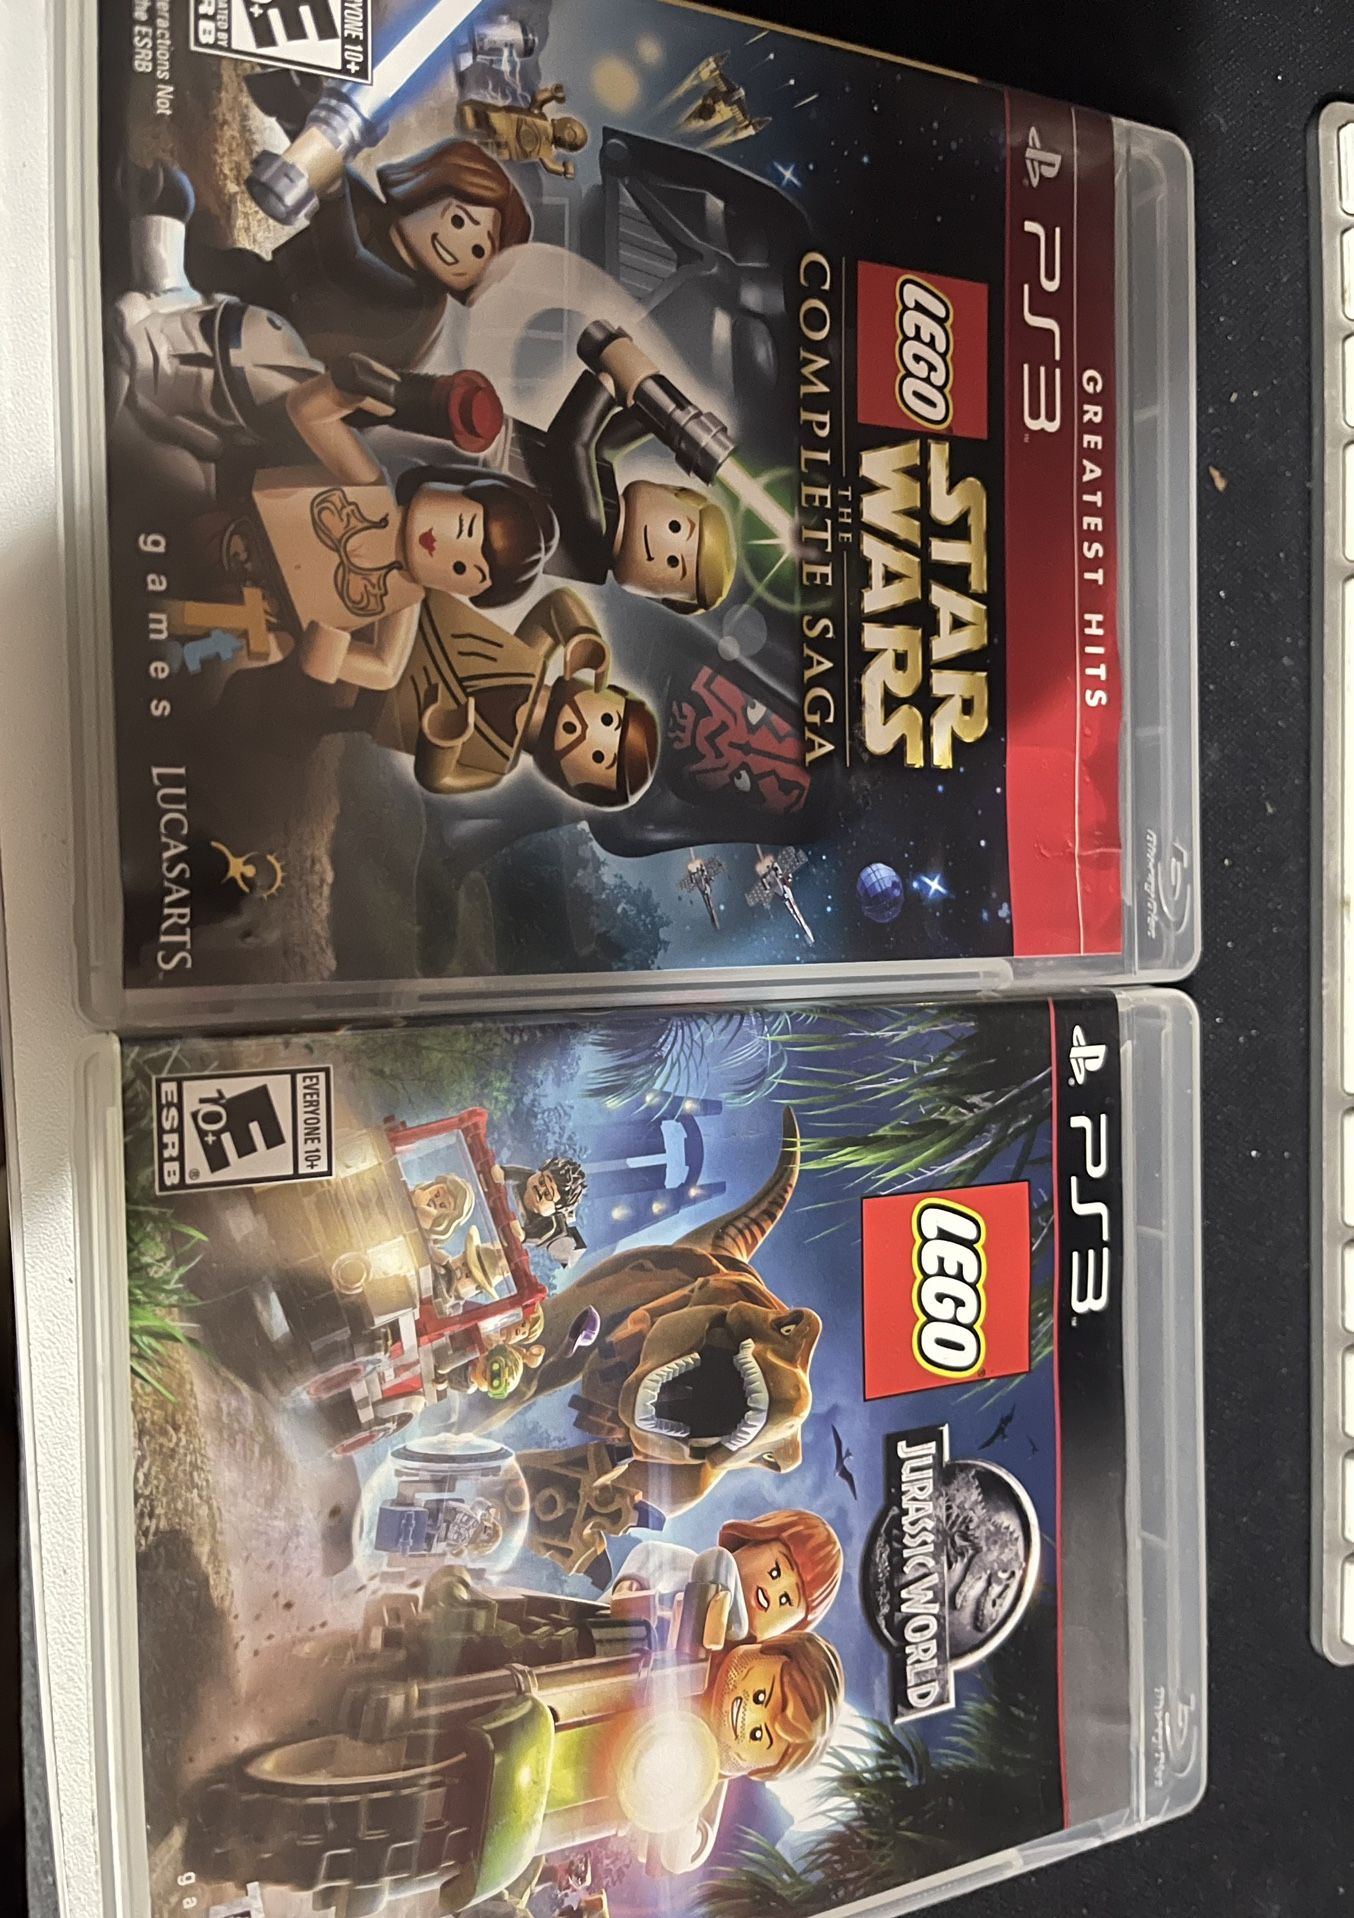 LEGO Star Wars The Complete Saga PS3 Sony And Lego Jurassic Park